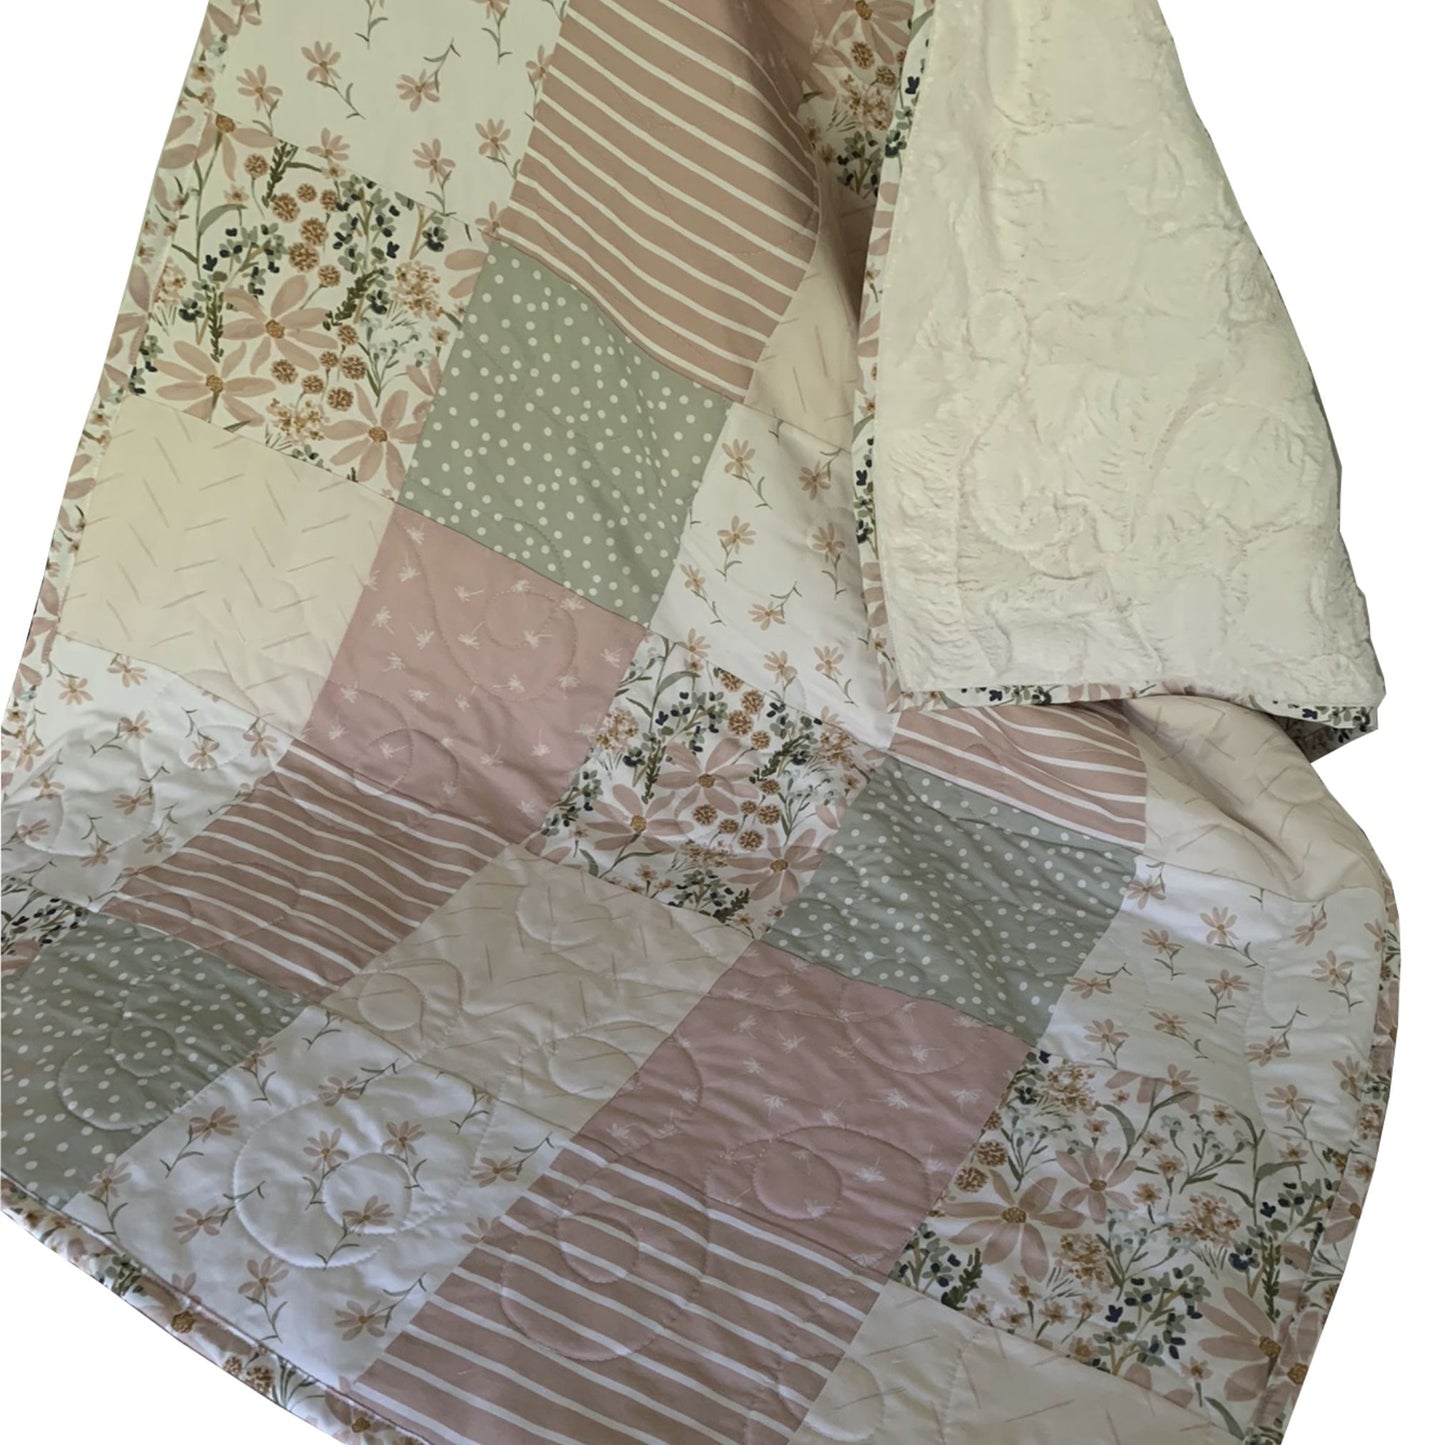 Daisy Dreams in Ballet Pink Patchwork Quilt